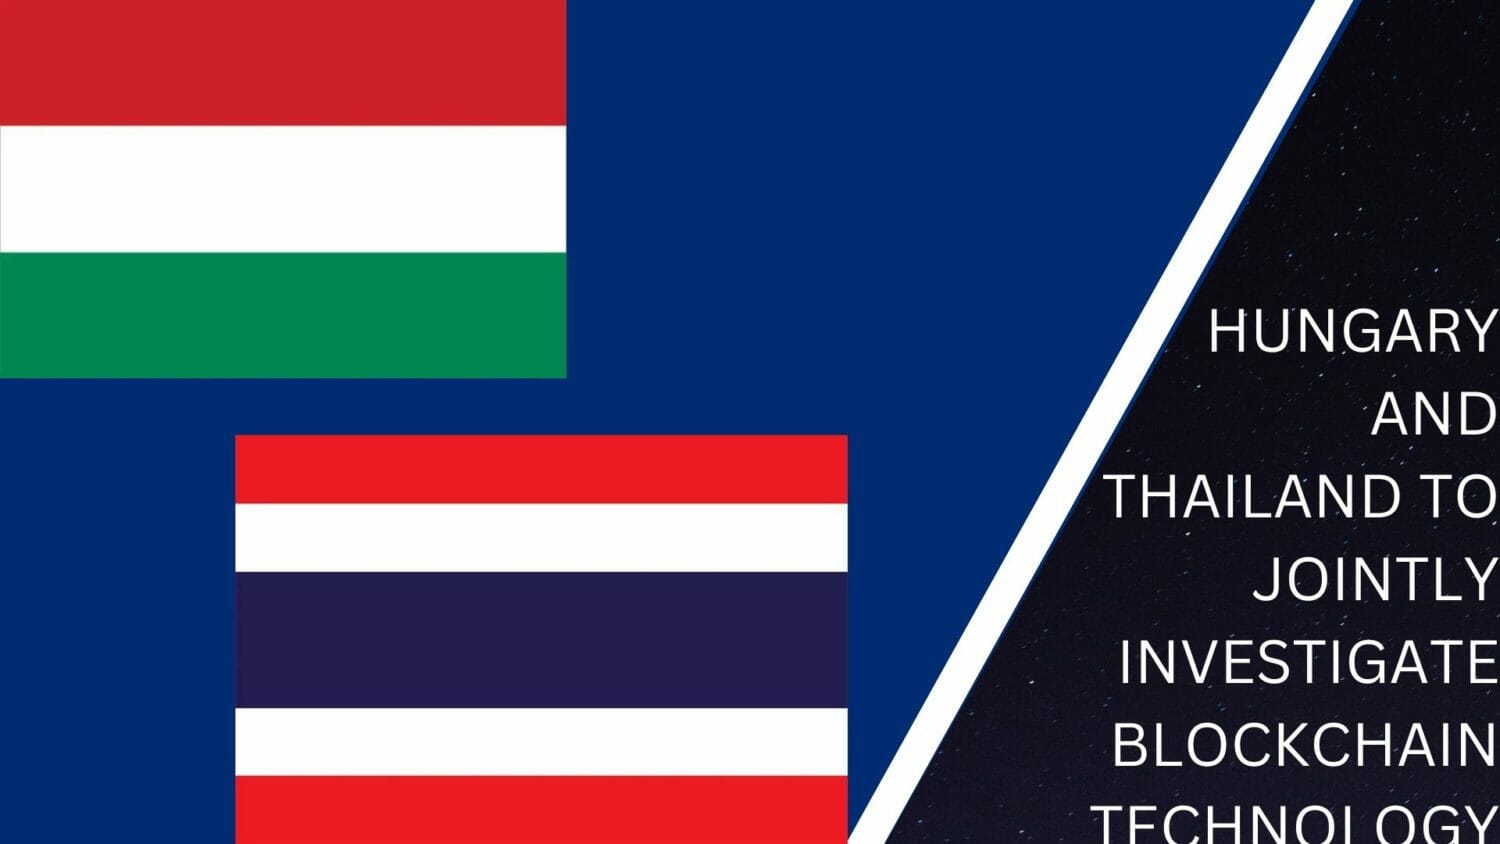 Hungary And Thailand To Jointly Investigate Blockchain Technology